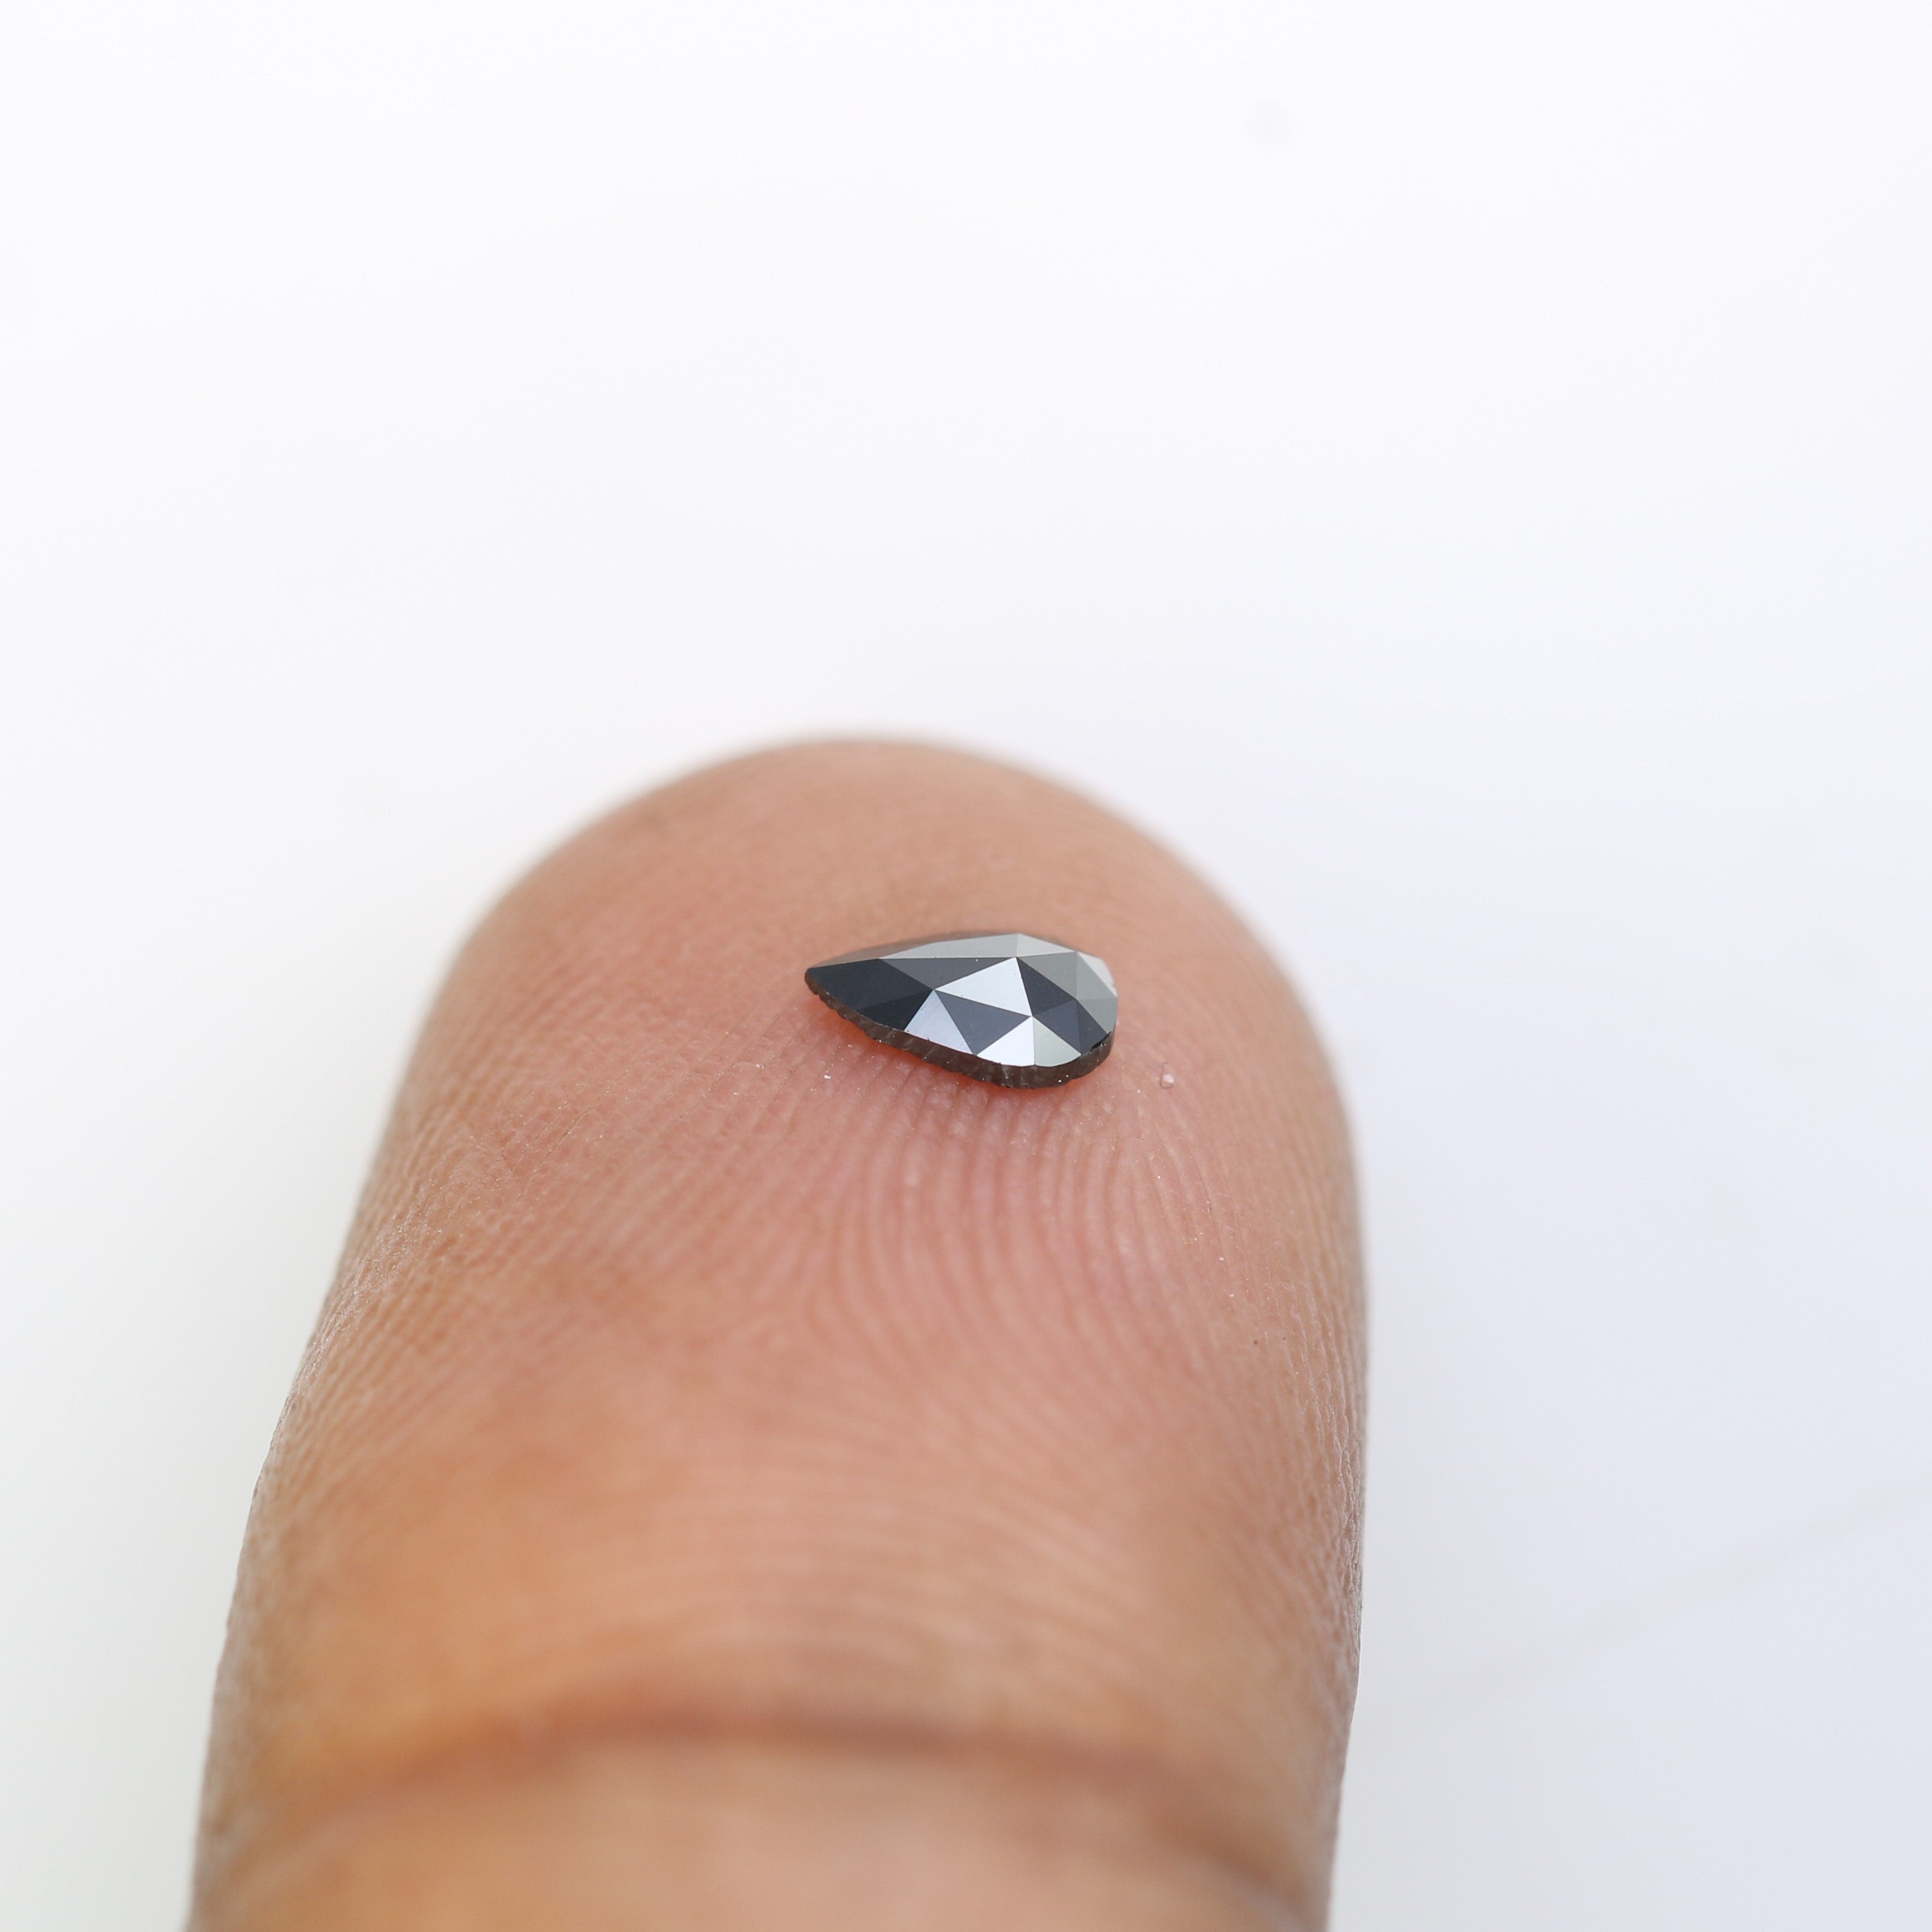 0.17 CT 5.00 MM Loose Natural Black Pear Cut Diamond For Engagement Ring